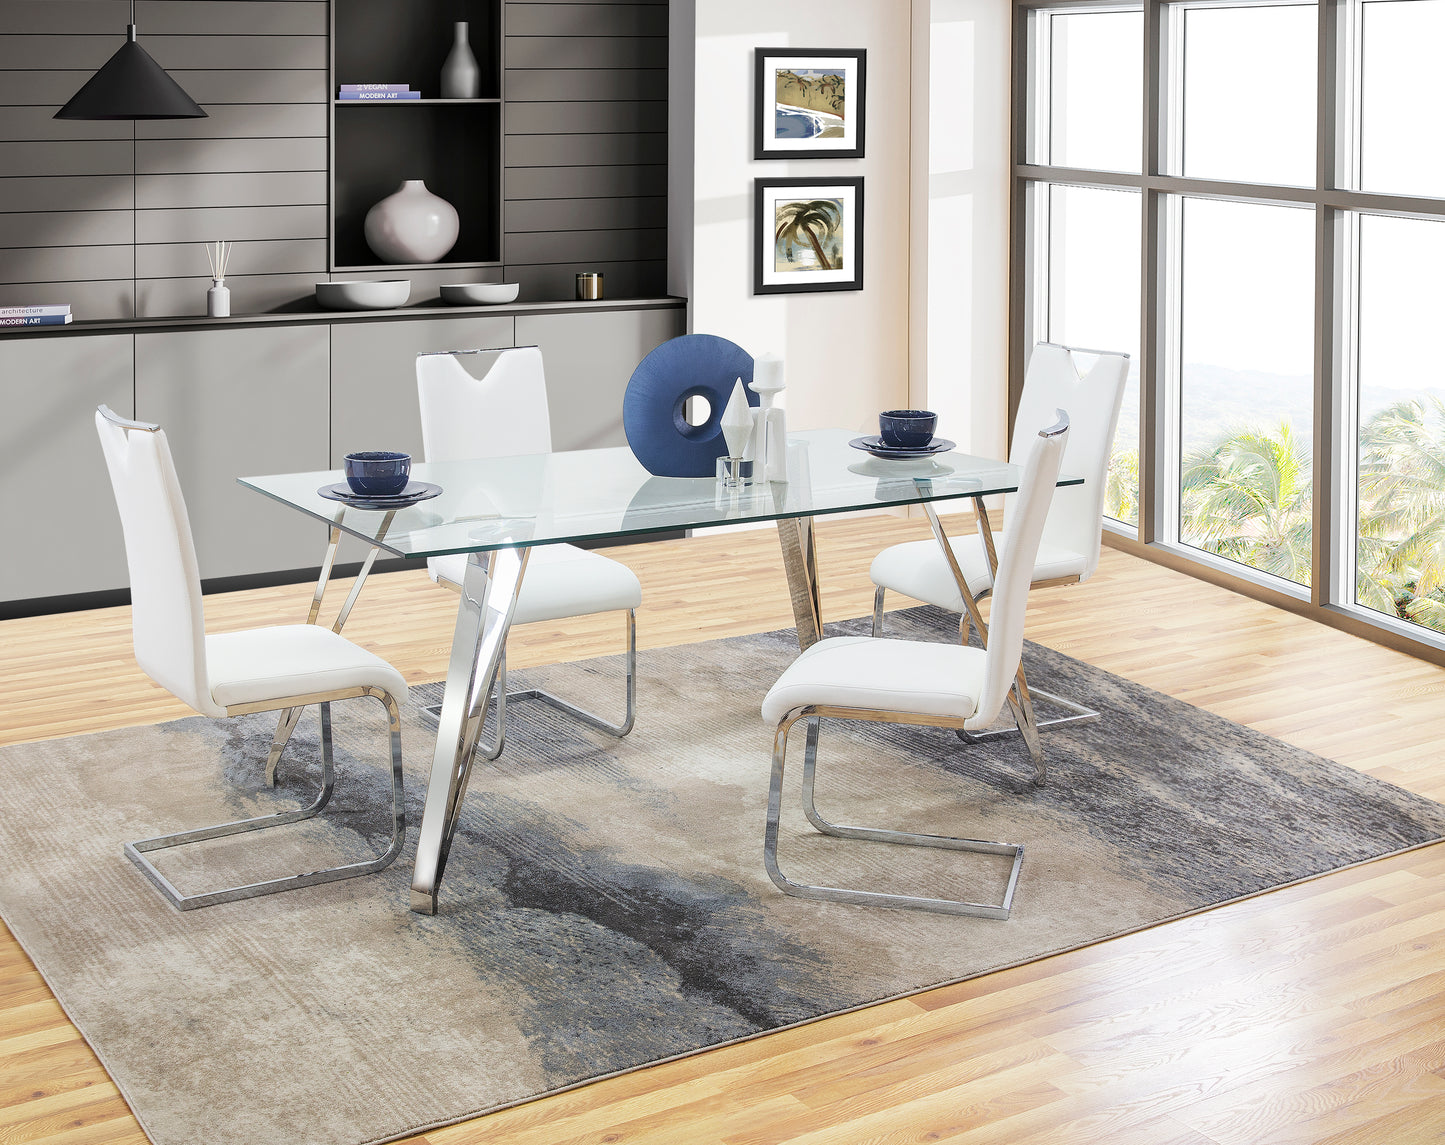 Carlo 5 Piece Dining Set with Skyline White Chairs